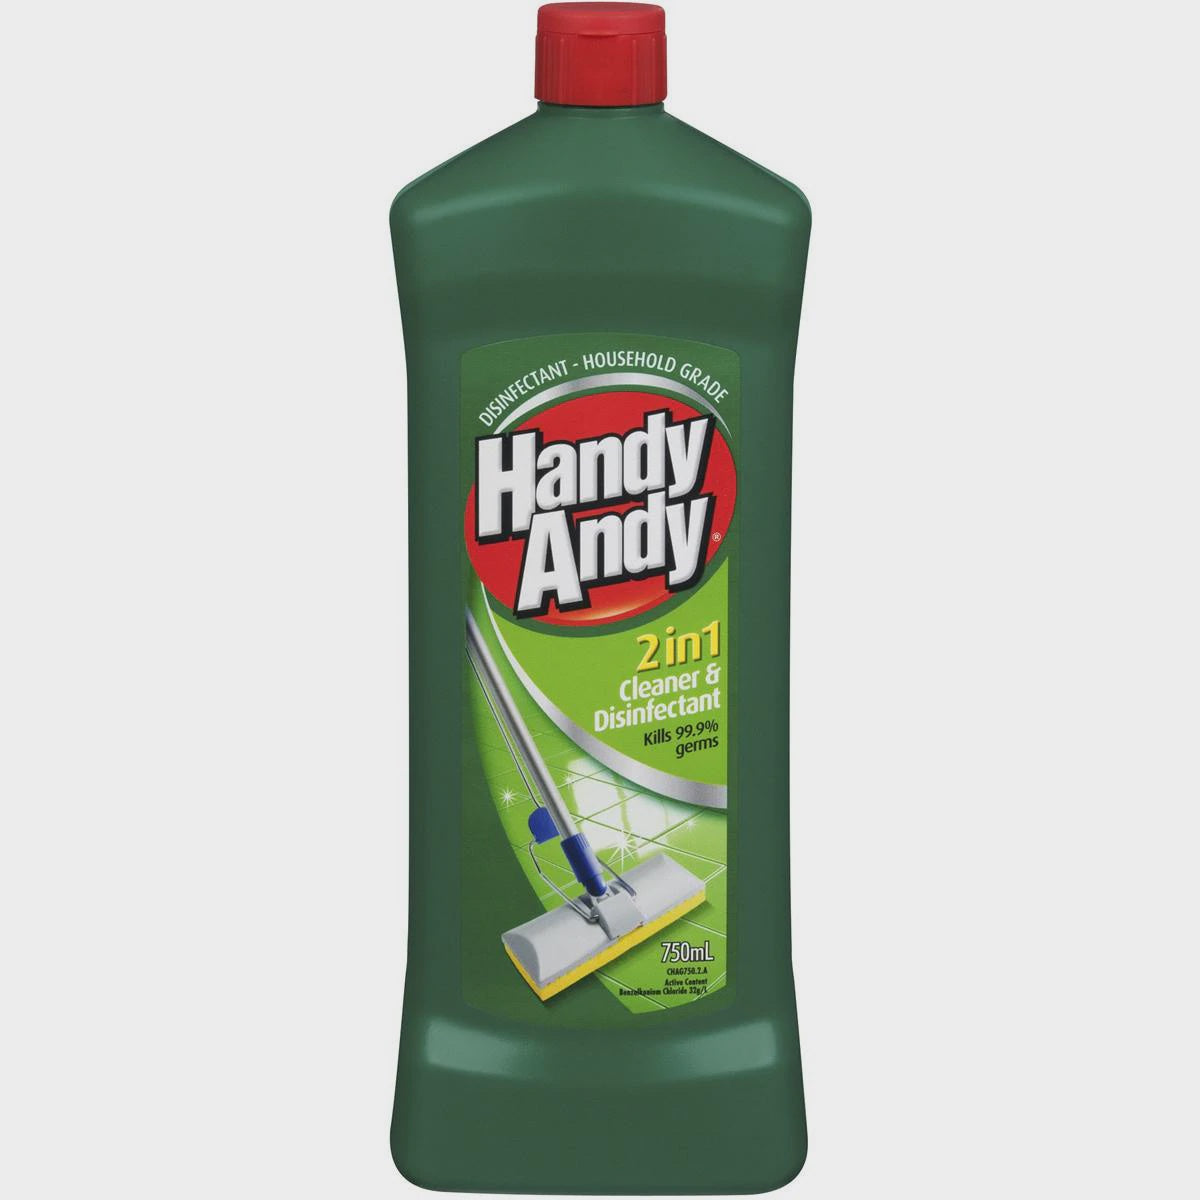 Clorox Handy Andy 2 in 1 Cleaner & Disinfectant 750Ml